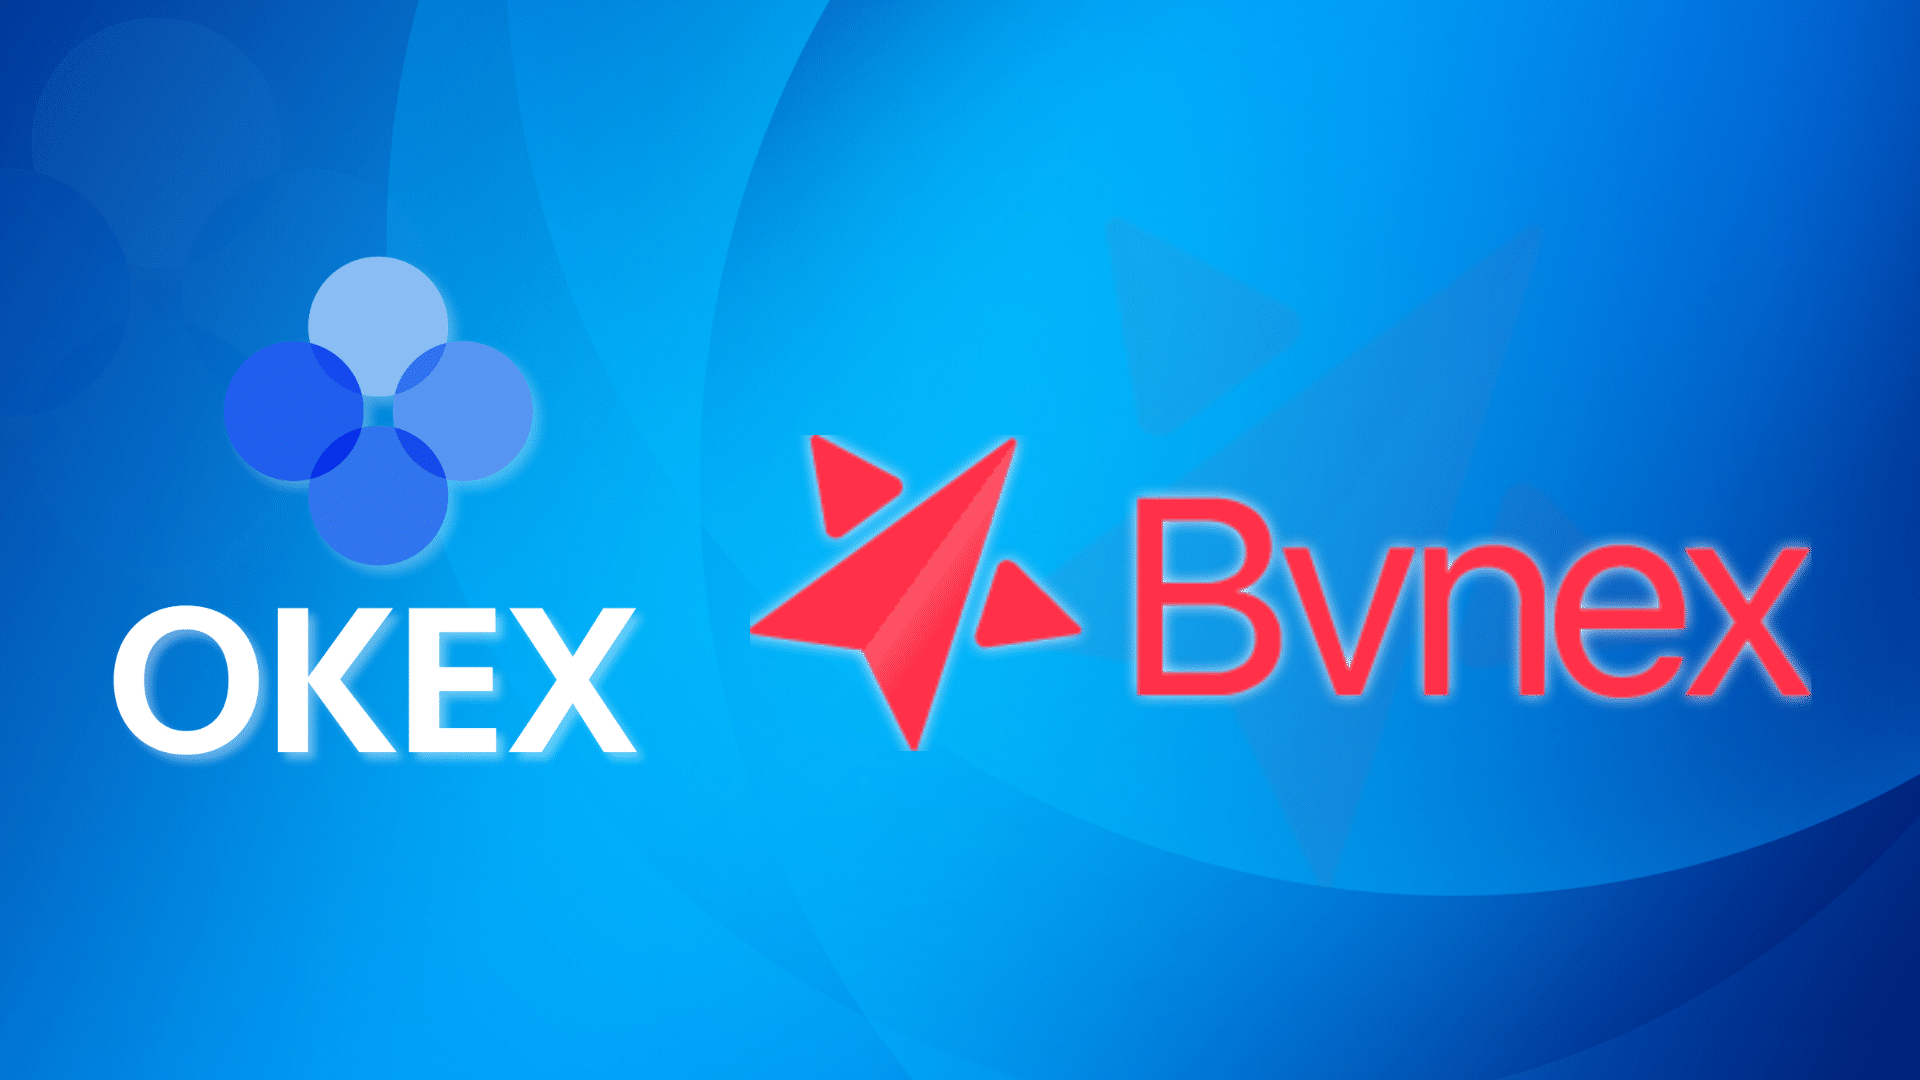 Crypto Exchange Bvnex Expands Operations; Lists OKEx ...